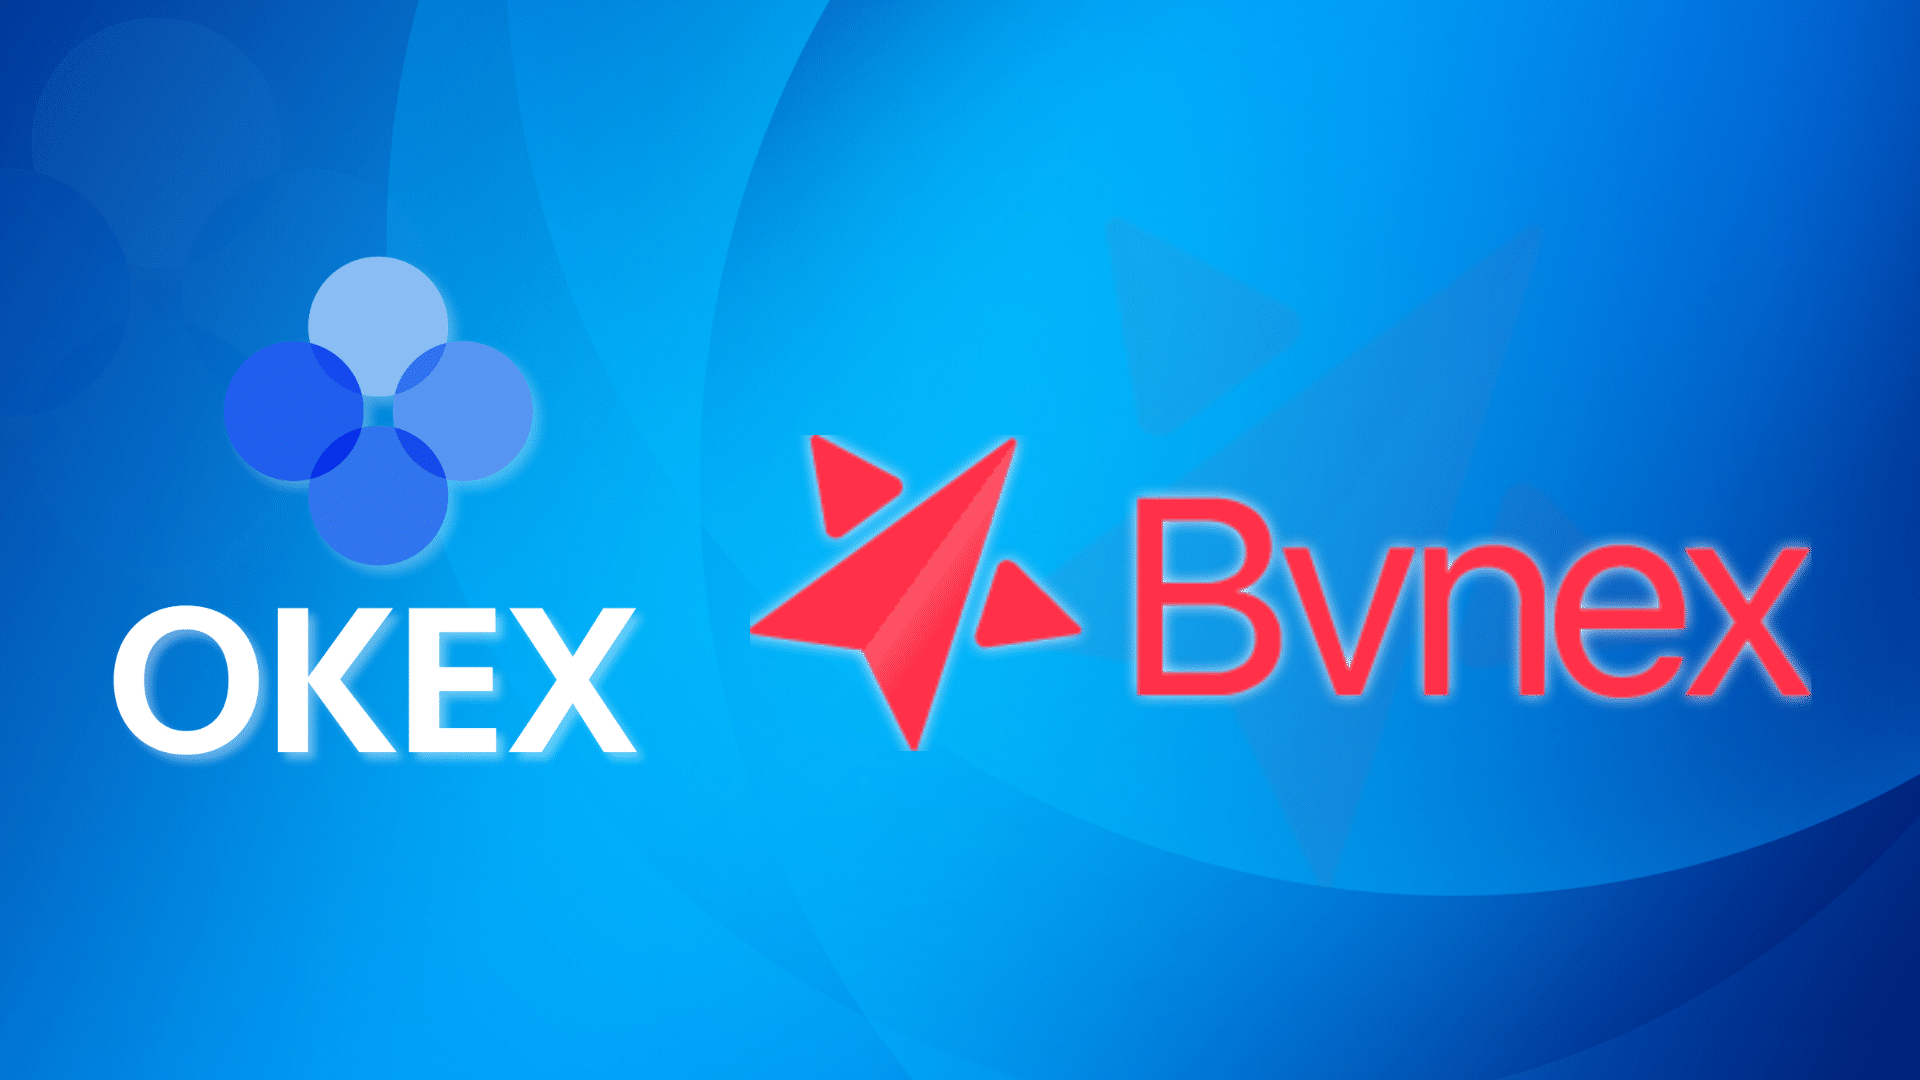 Crypto Exchange Bvnex Expands Operations; Lists OKEx ...